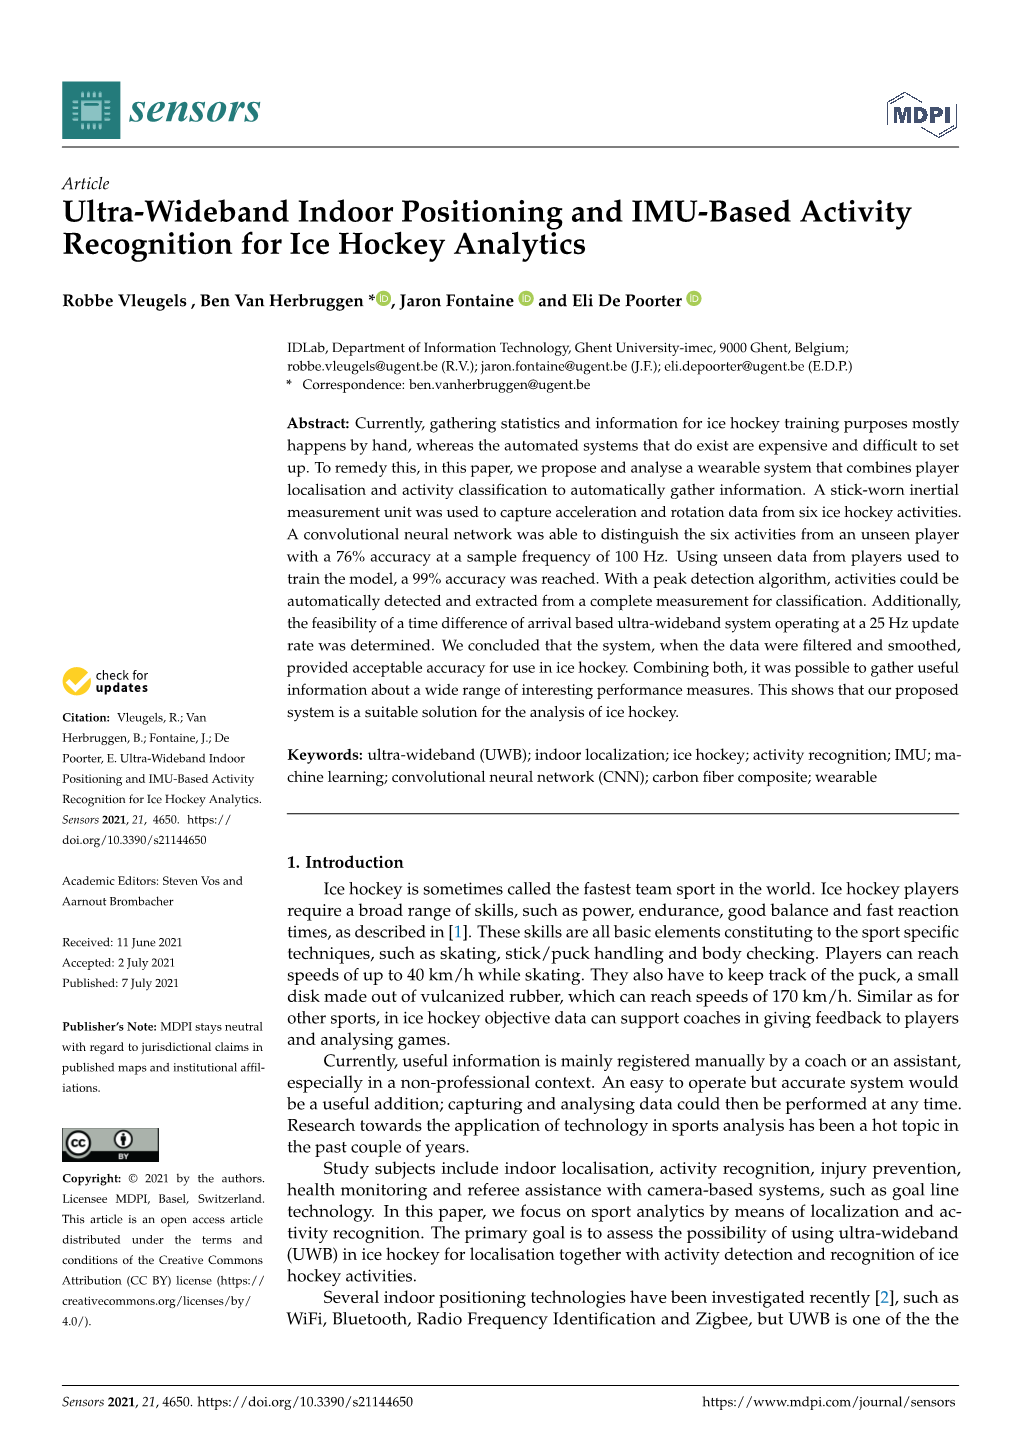 Ultra-Wideband Indoor Positioning and IMU-Based Activity Recognition for Ice Hockey Analytics